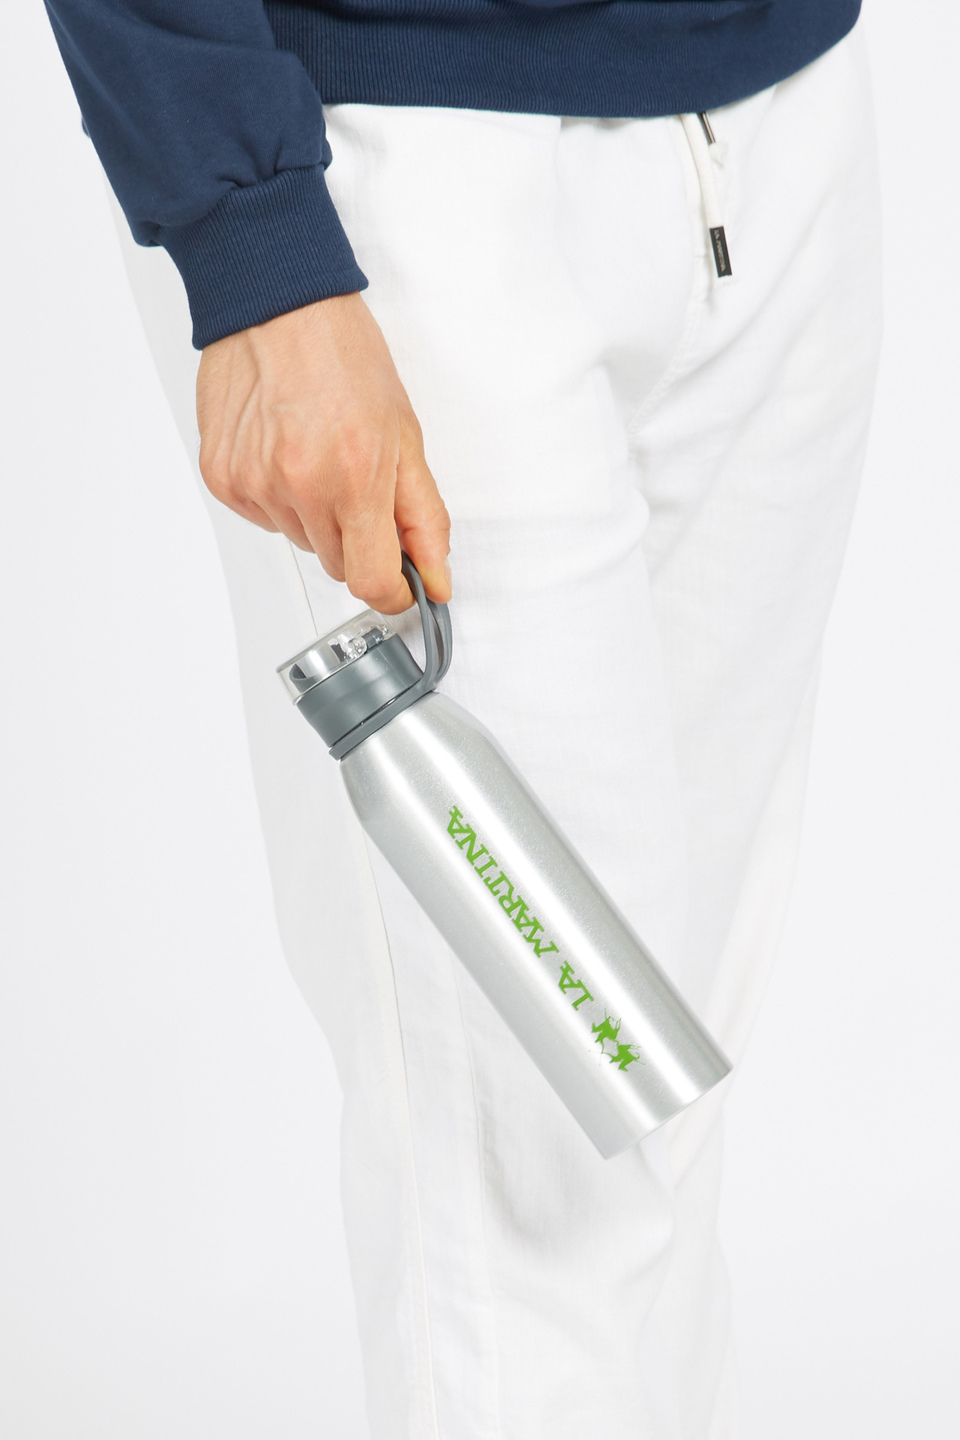 Unisex aluminium bottle with a watertight lid and logo | La Martina - Official Online Shop